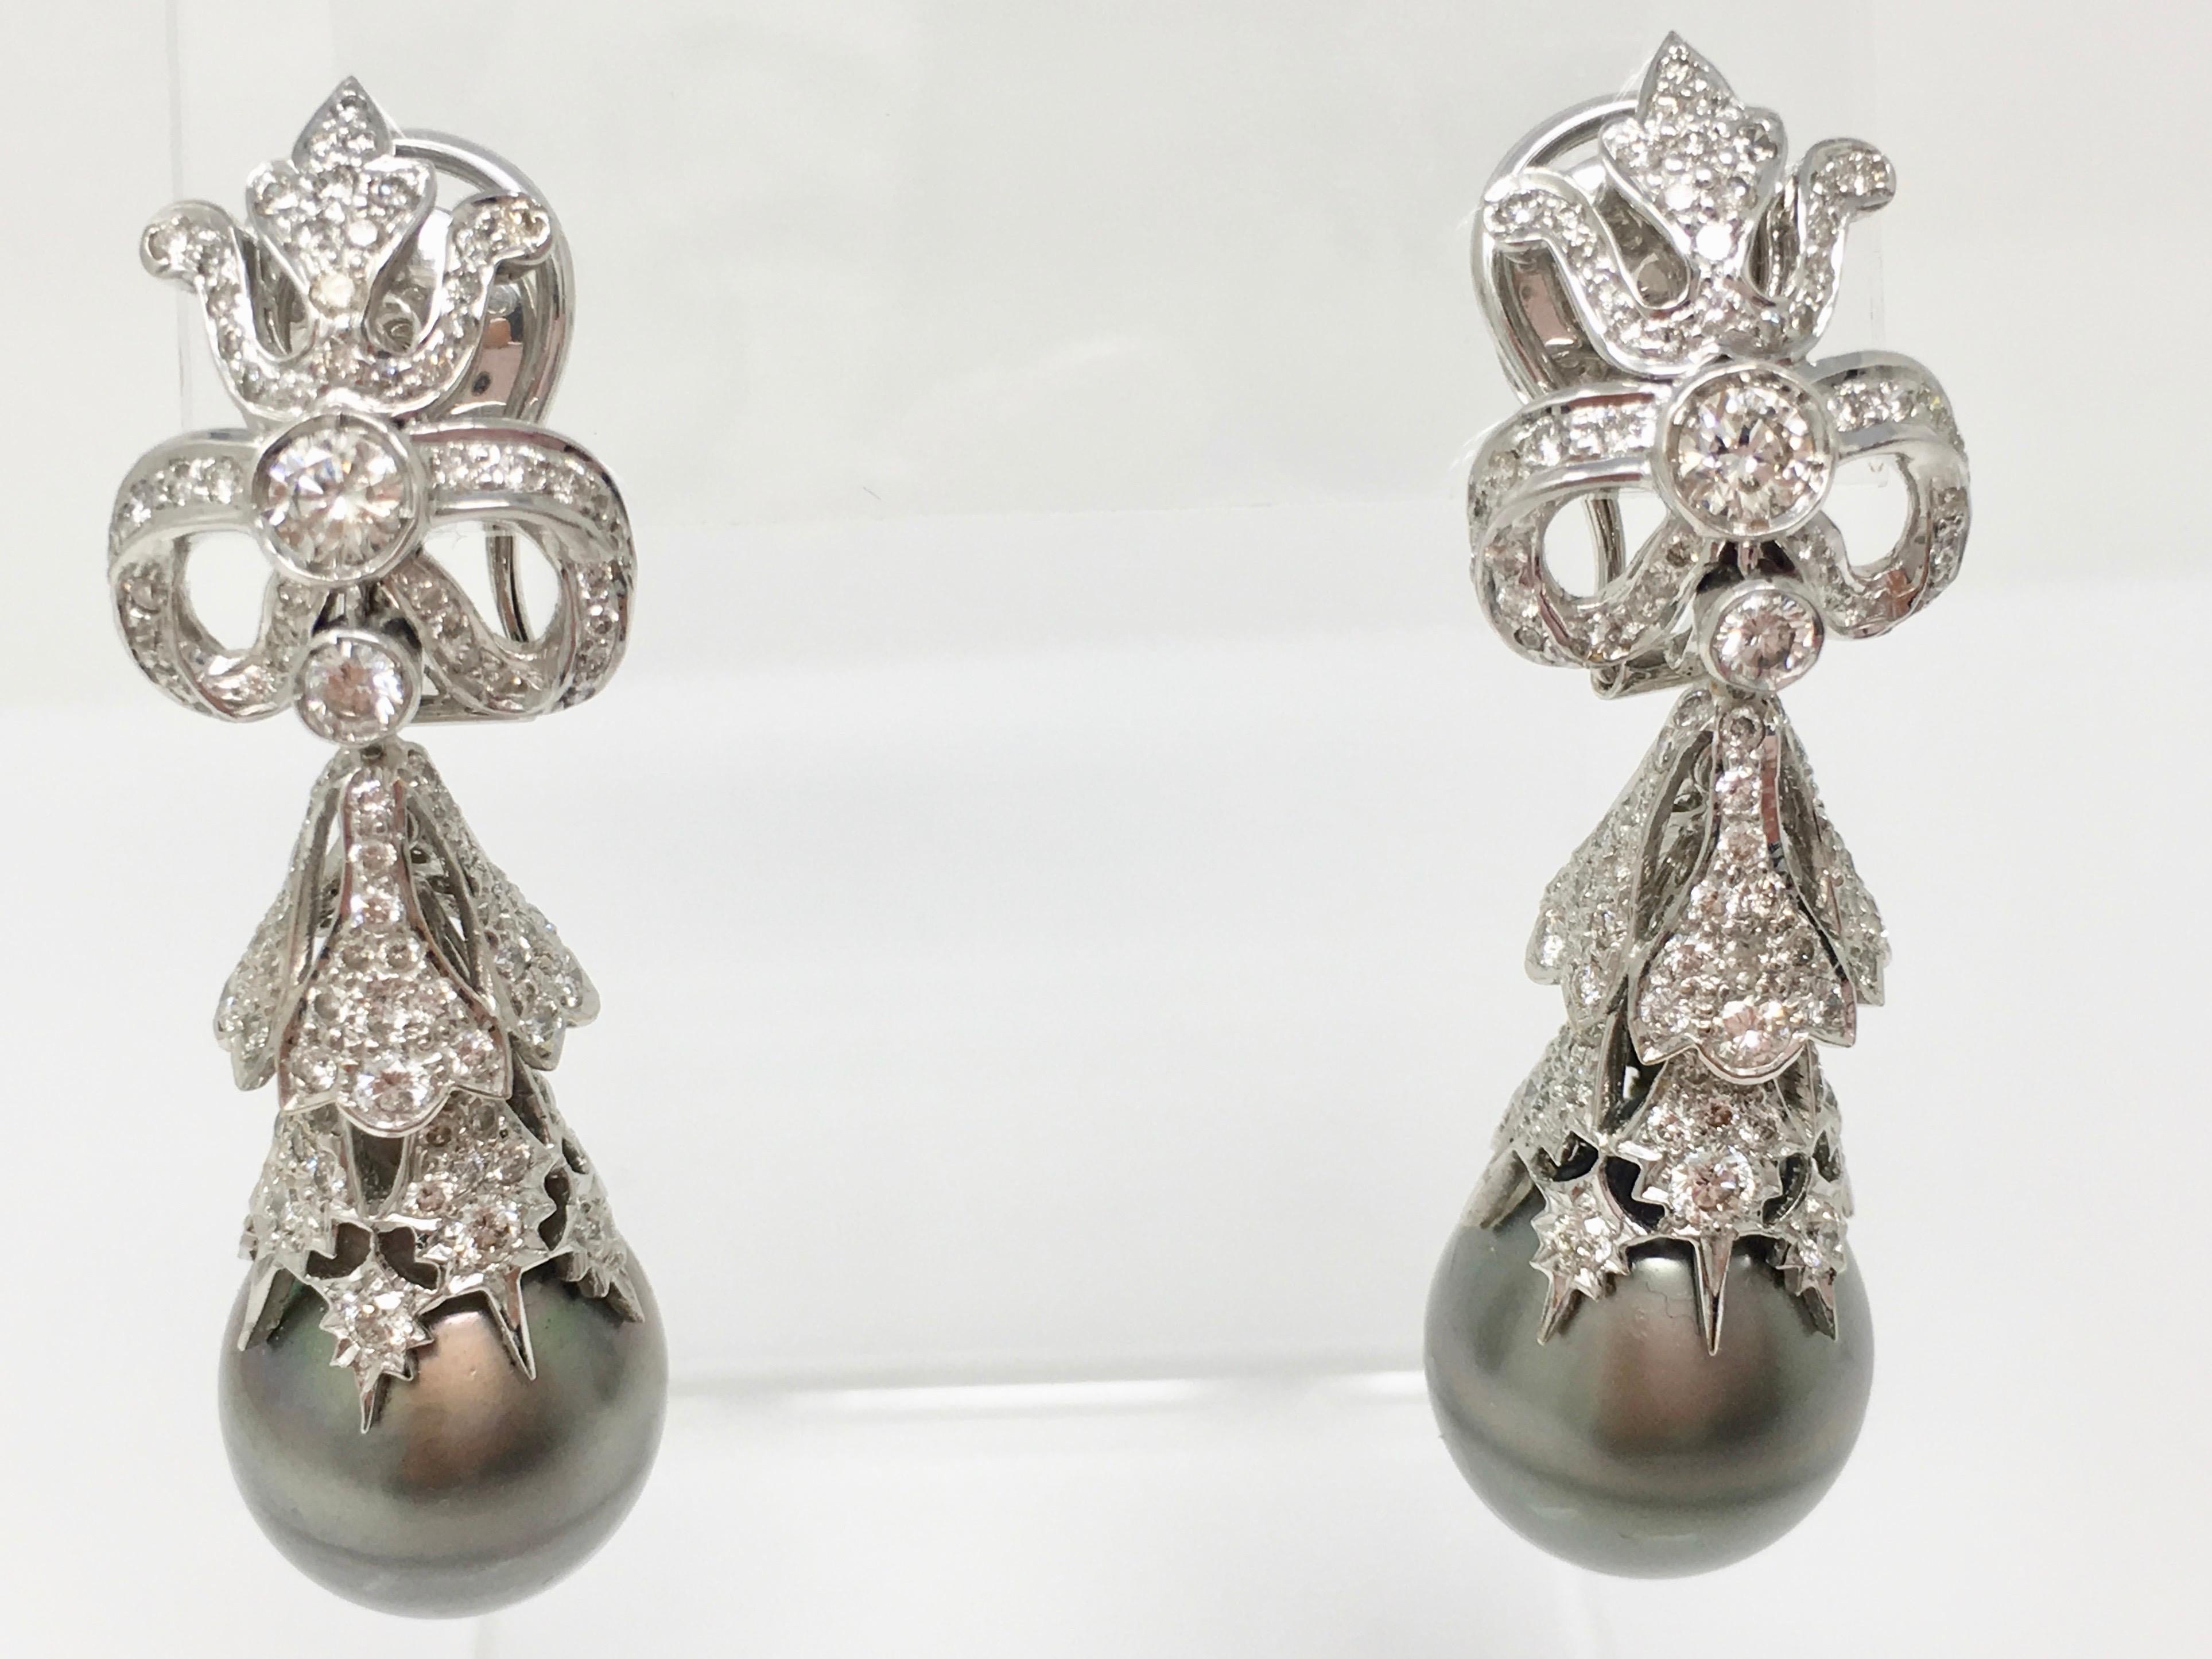 3.76 Carat White Round Brilliant Diamonds and South Sea Pearl Earrings in 18k 1